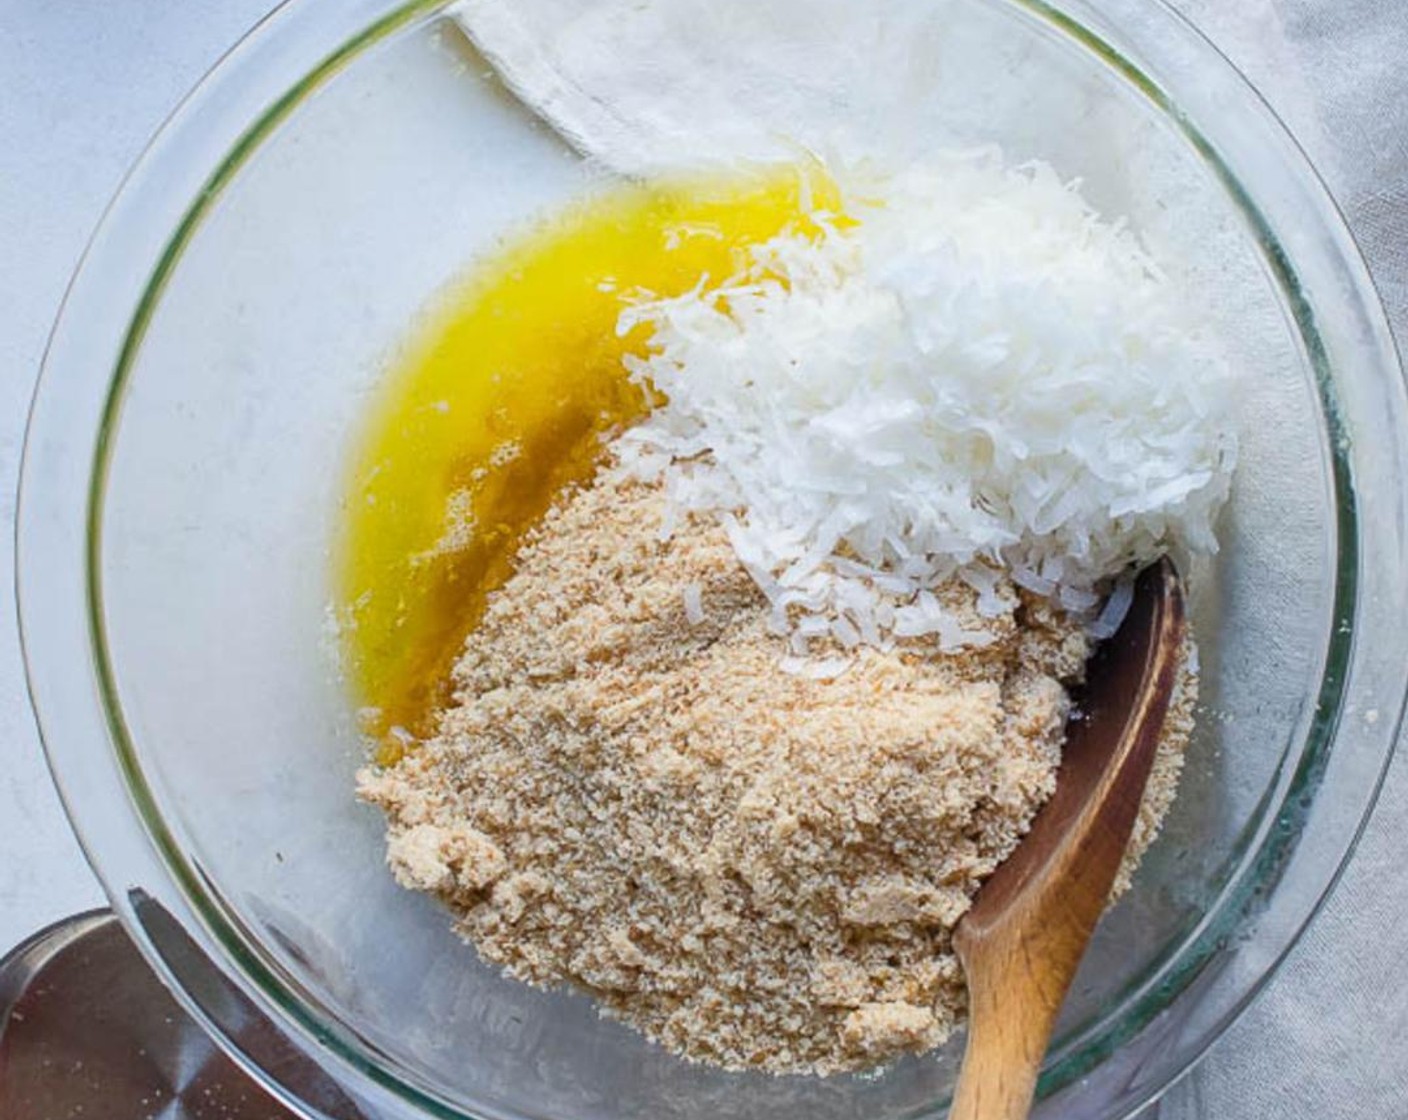 step 2 Add Nilla Wafers (2 cups) and Granulated Sugar (1/4 cup) to the bowl of a food processor and pulse until fine crumbs form. Transfer to a medium bowl and add Sweetened Coconut Flakes (1/2 cup), and Butter (1/3 cup). Toss to combine completely.